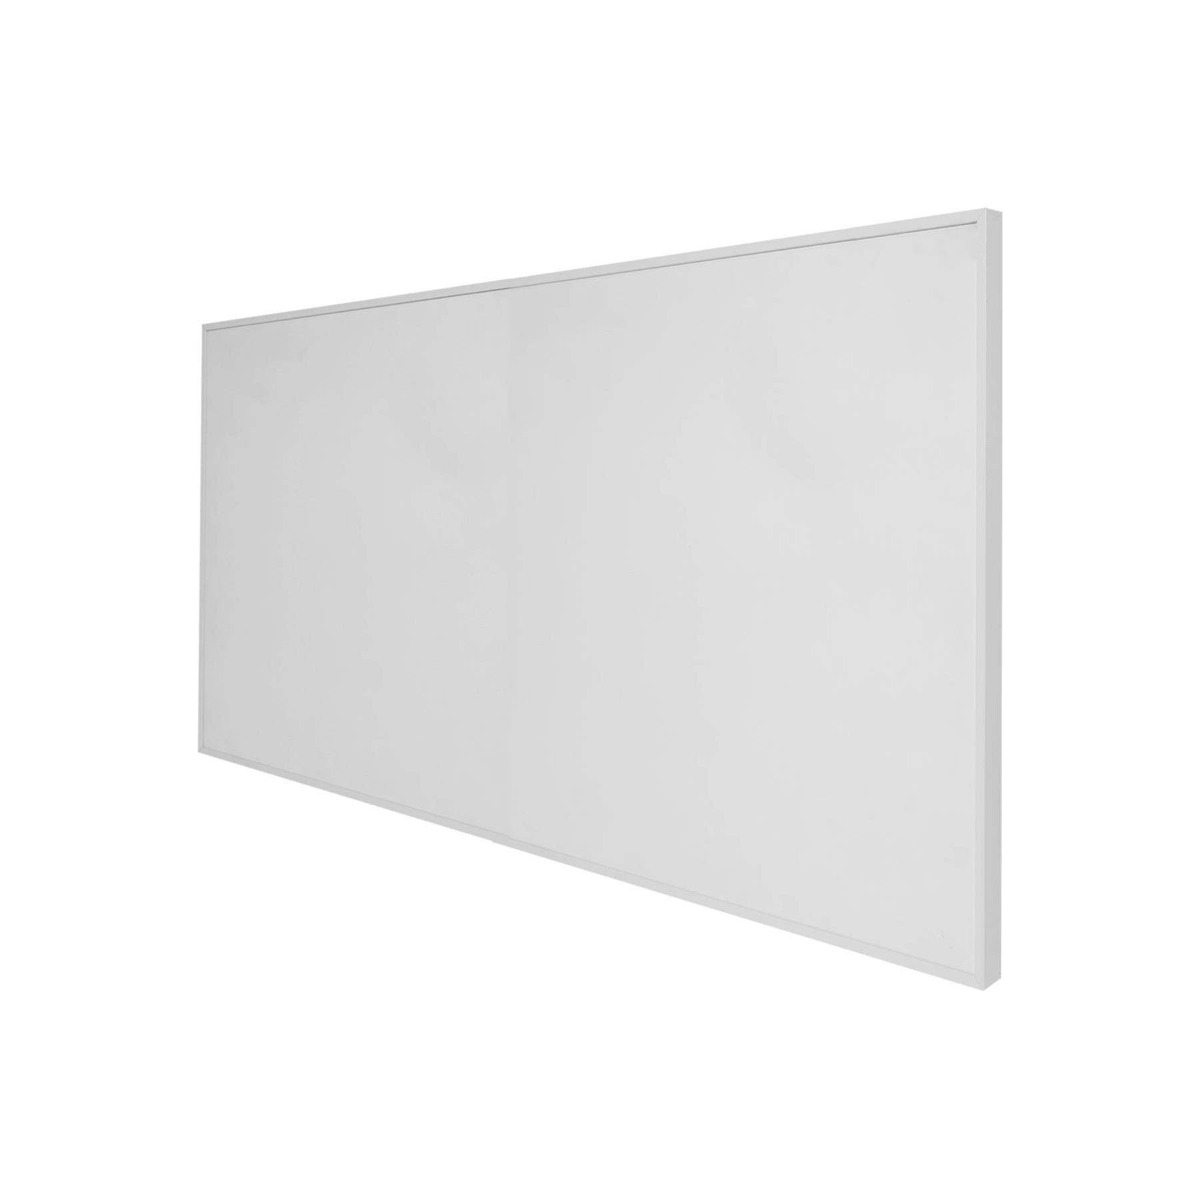 Ecostrad Accent iQ WiFi Controlled Infrared Wall Panel - 1100w (1205 x 905mm)